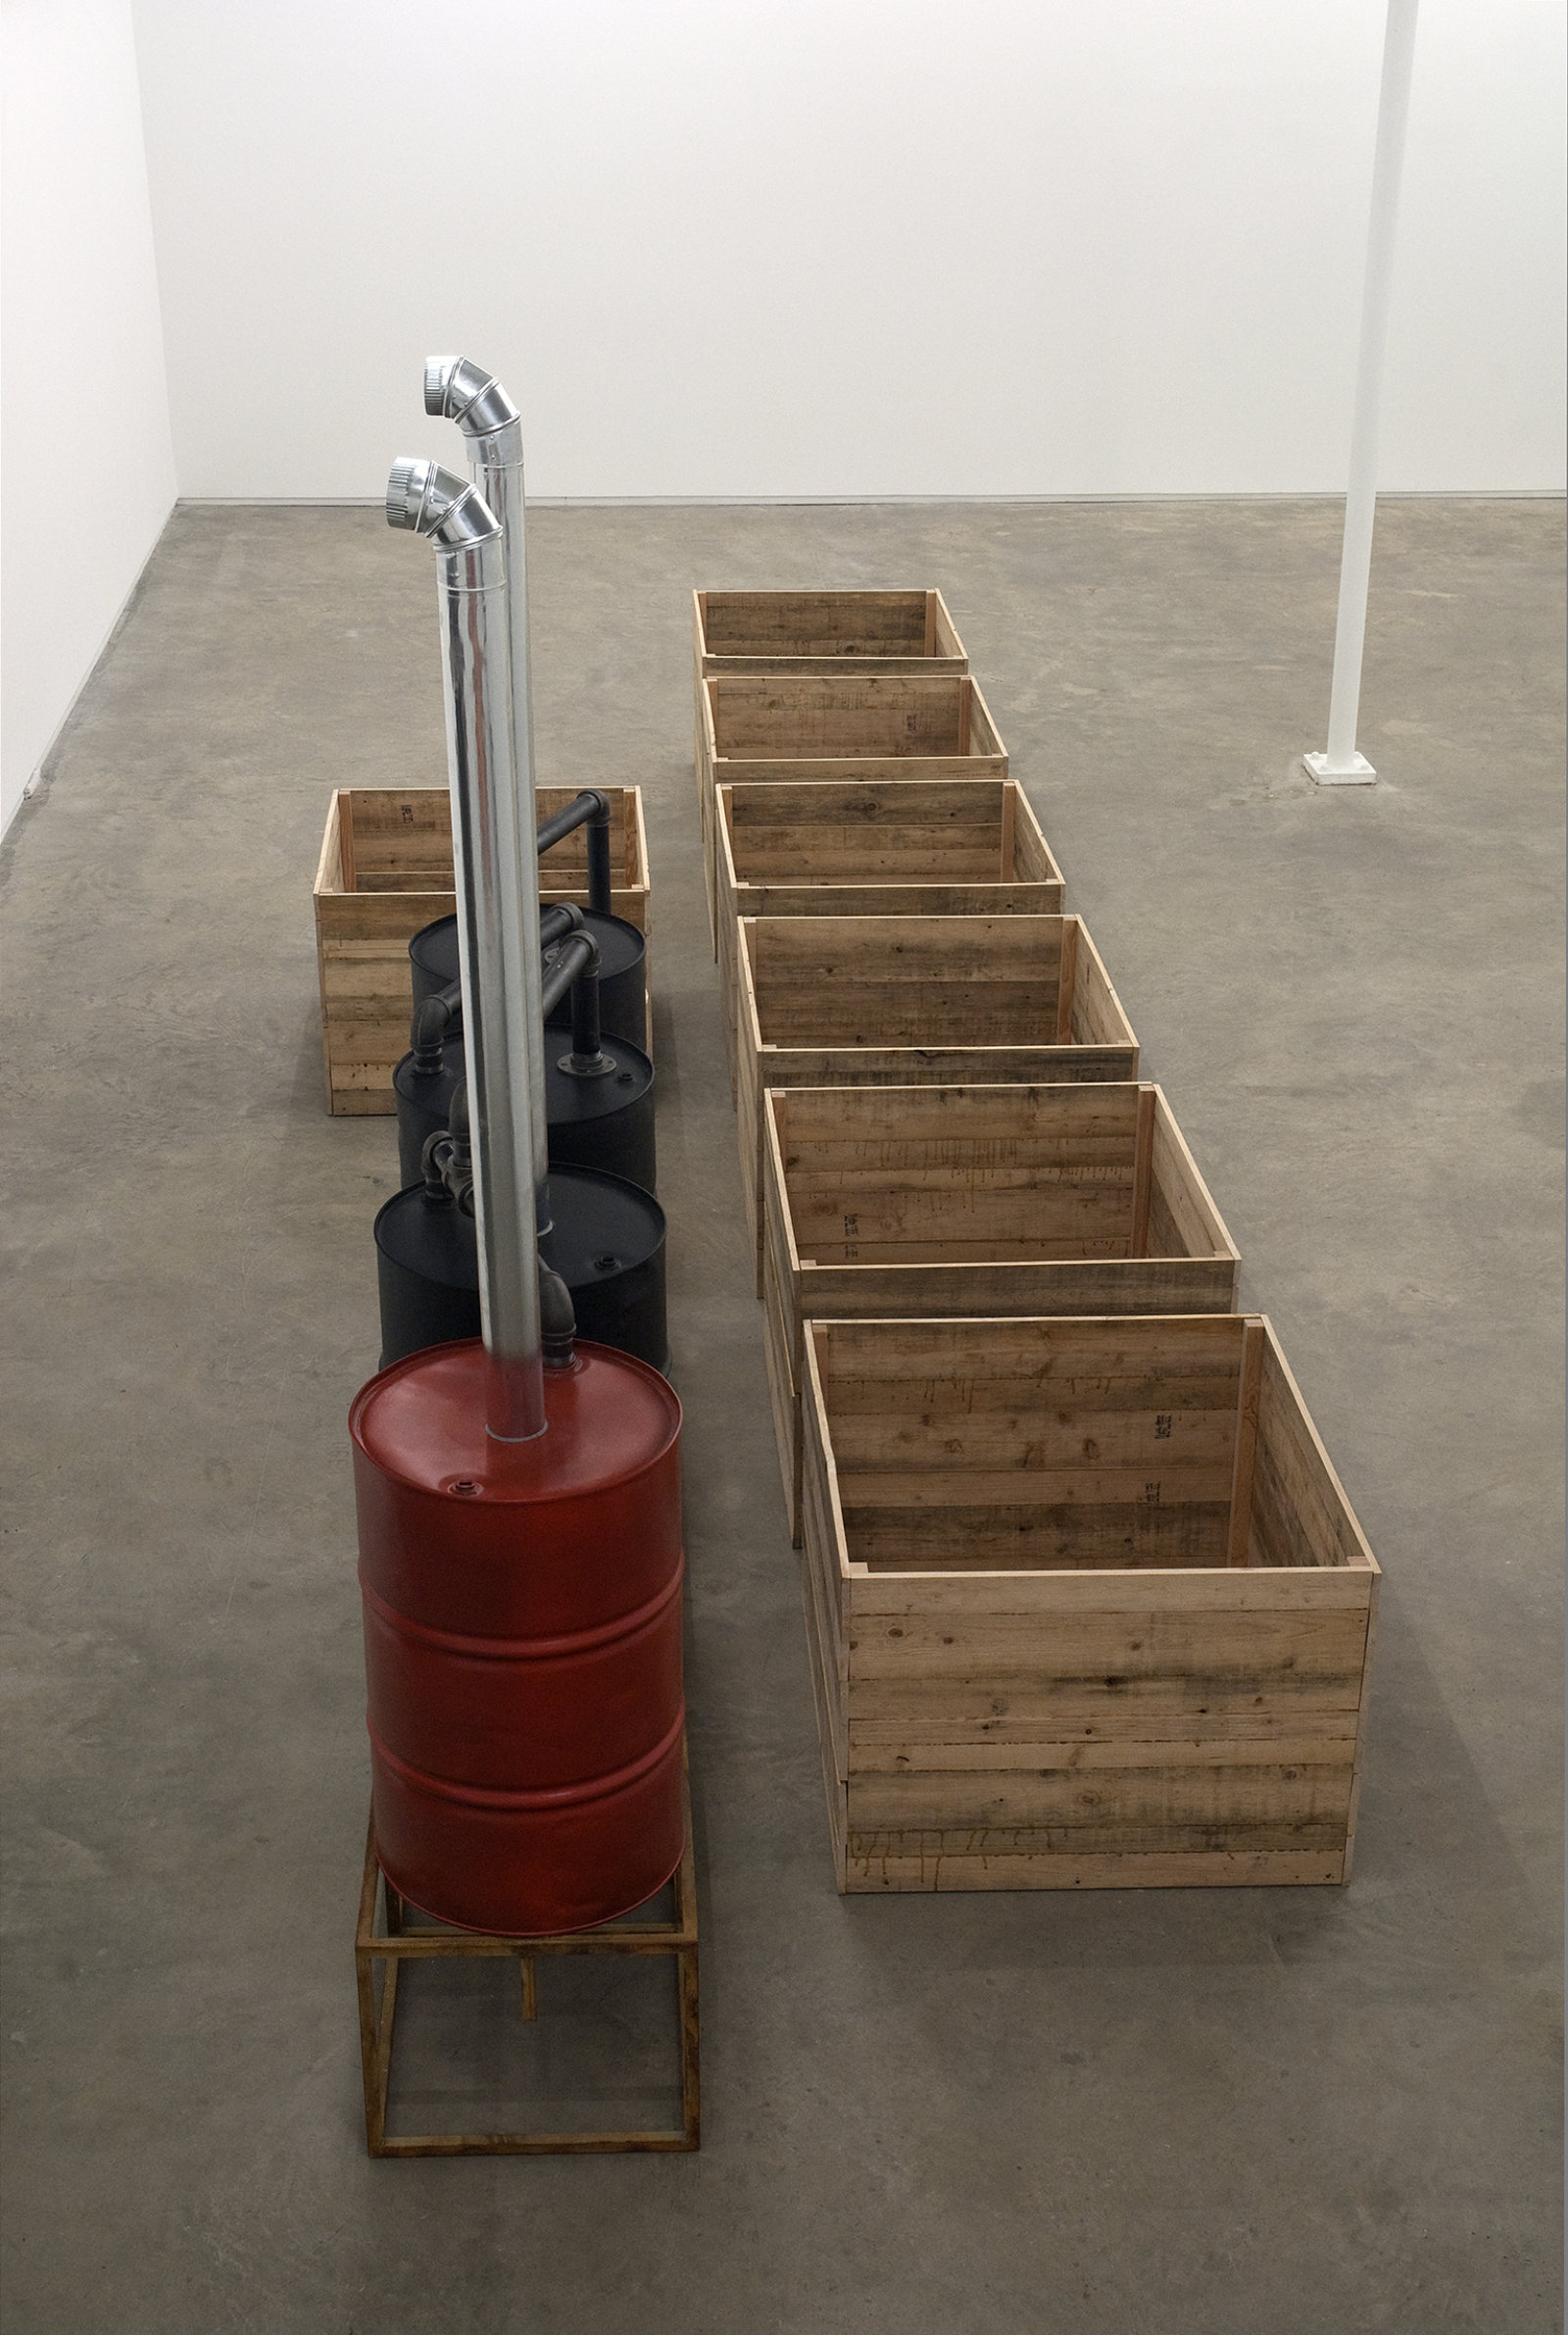 ​Myfanwy MacLeod, Everything Seems Empty Without You, 2009, metal oil drums, metal sand, metal pipes, wooden boxes, wooden barrel, 118 x 332 x 94 in. (300 x 843 x 239 cm) by 